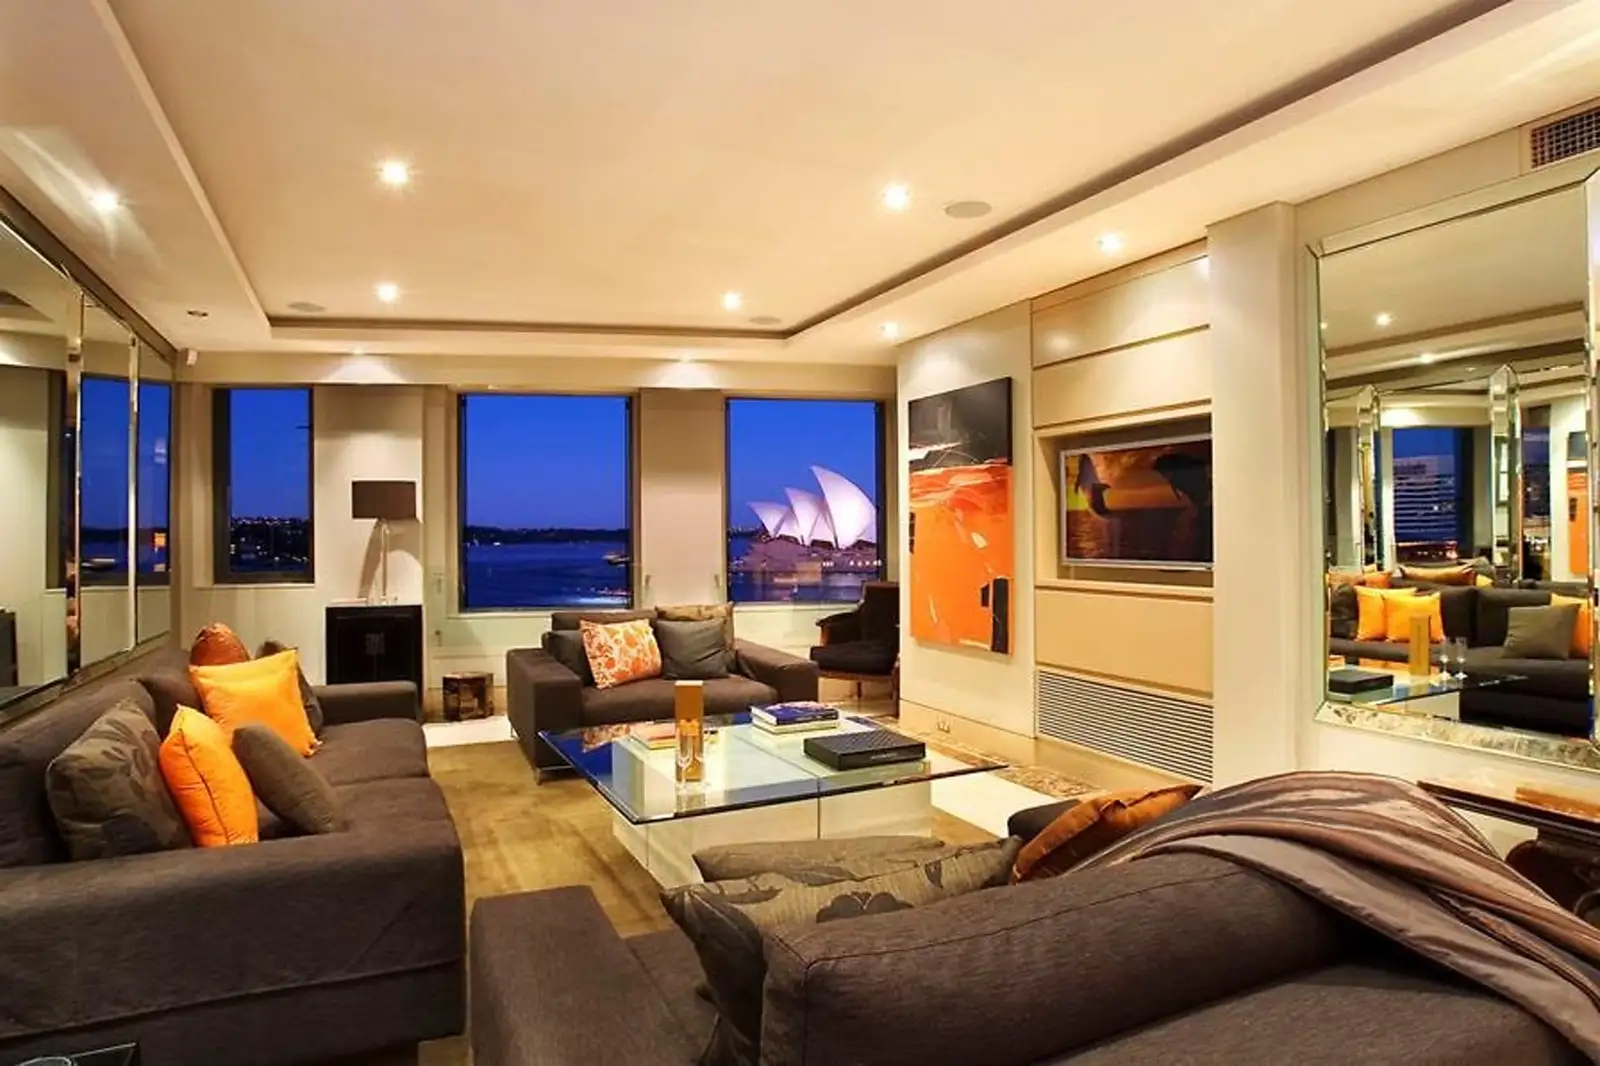 5/8 Hickson Road, The Rocks, Sydney Sold by Sydney Sotheby's International Realty - image 1